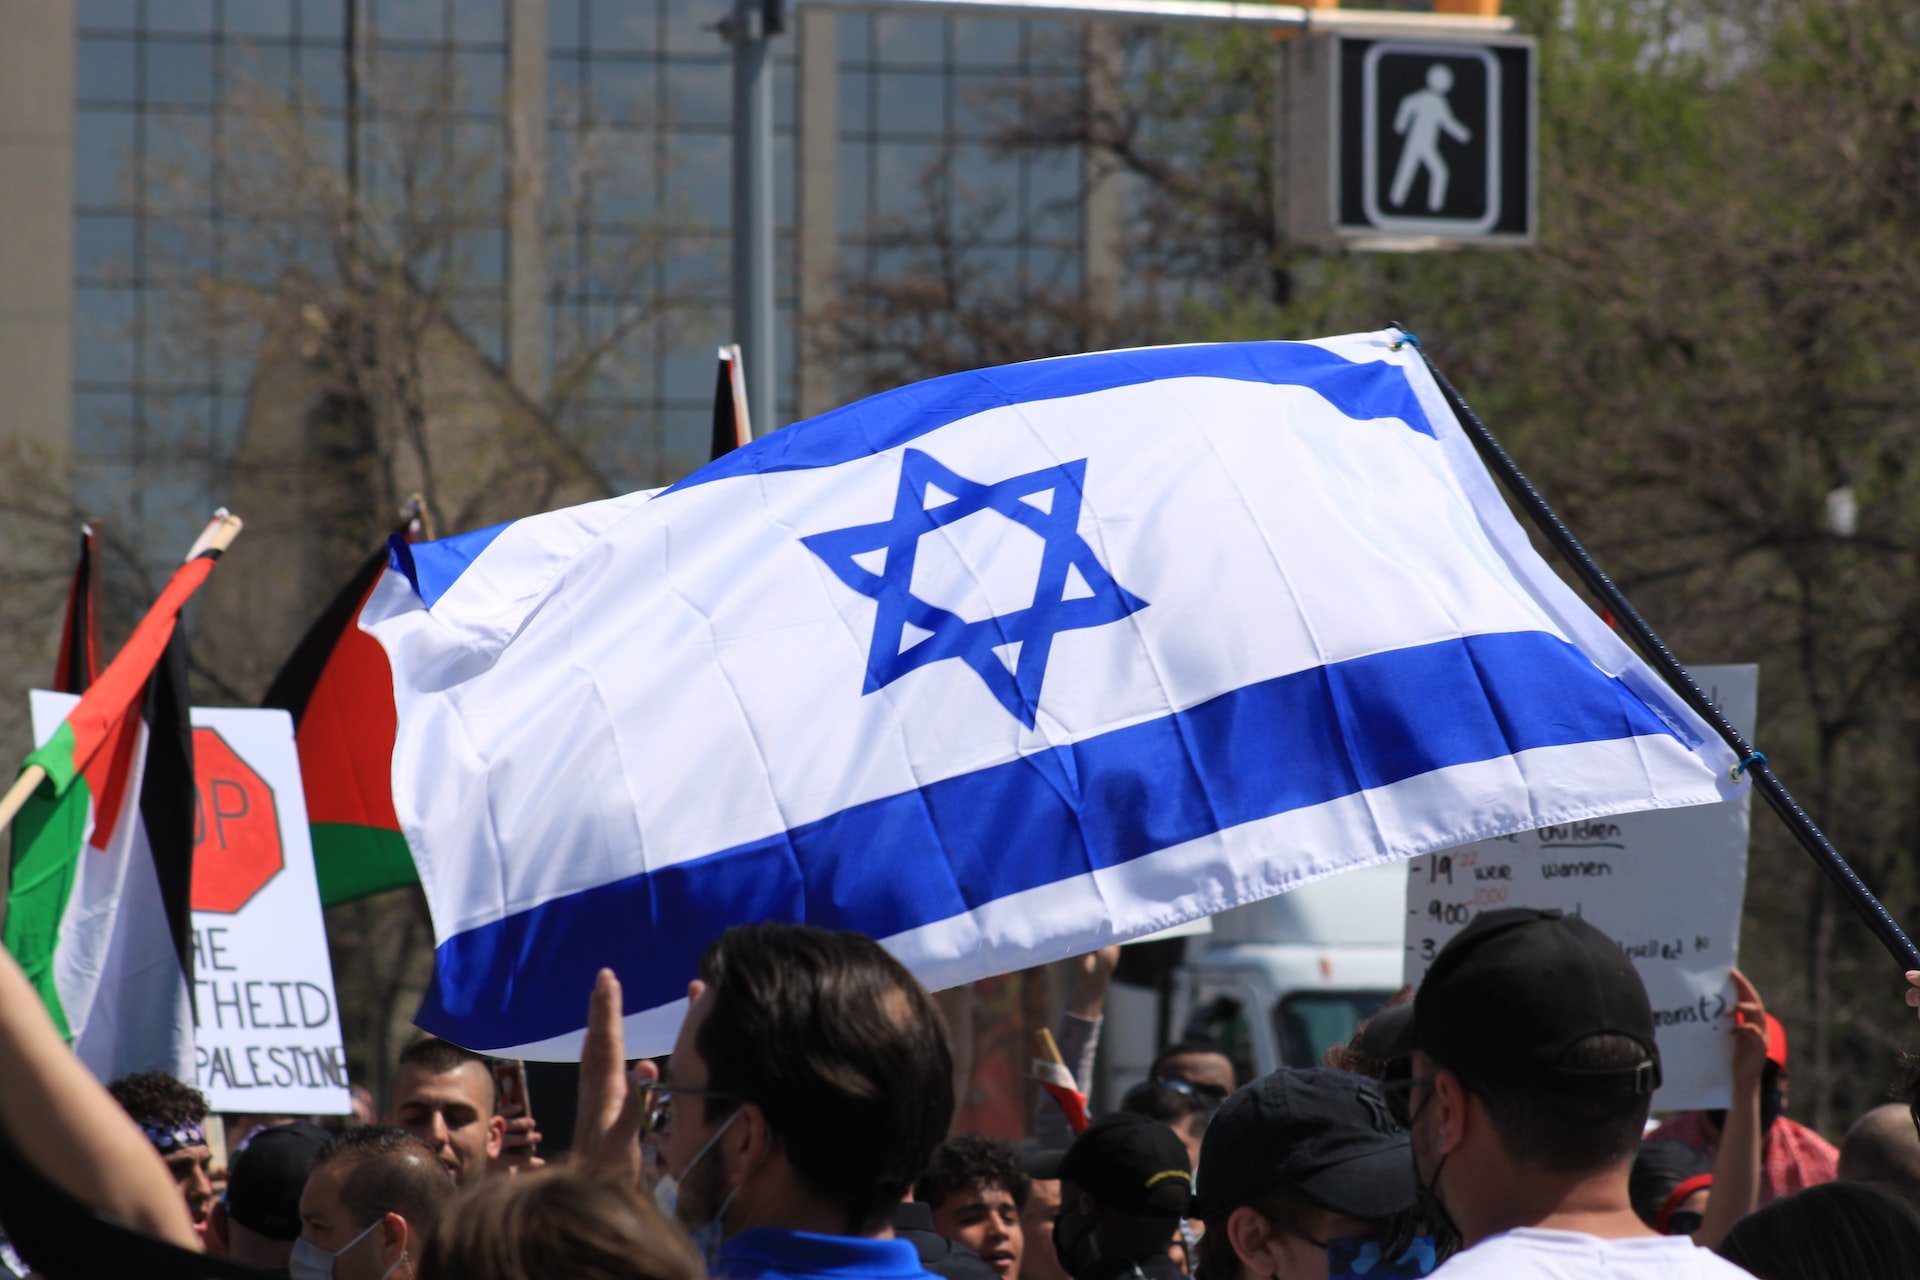 Israel Palestine protest flags